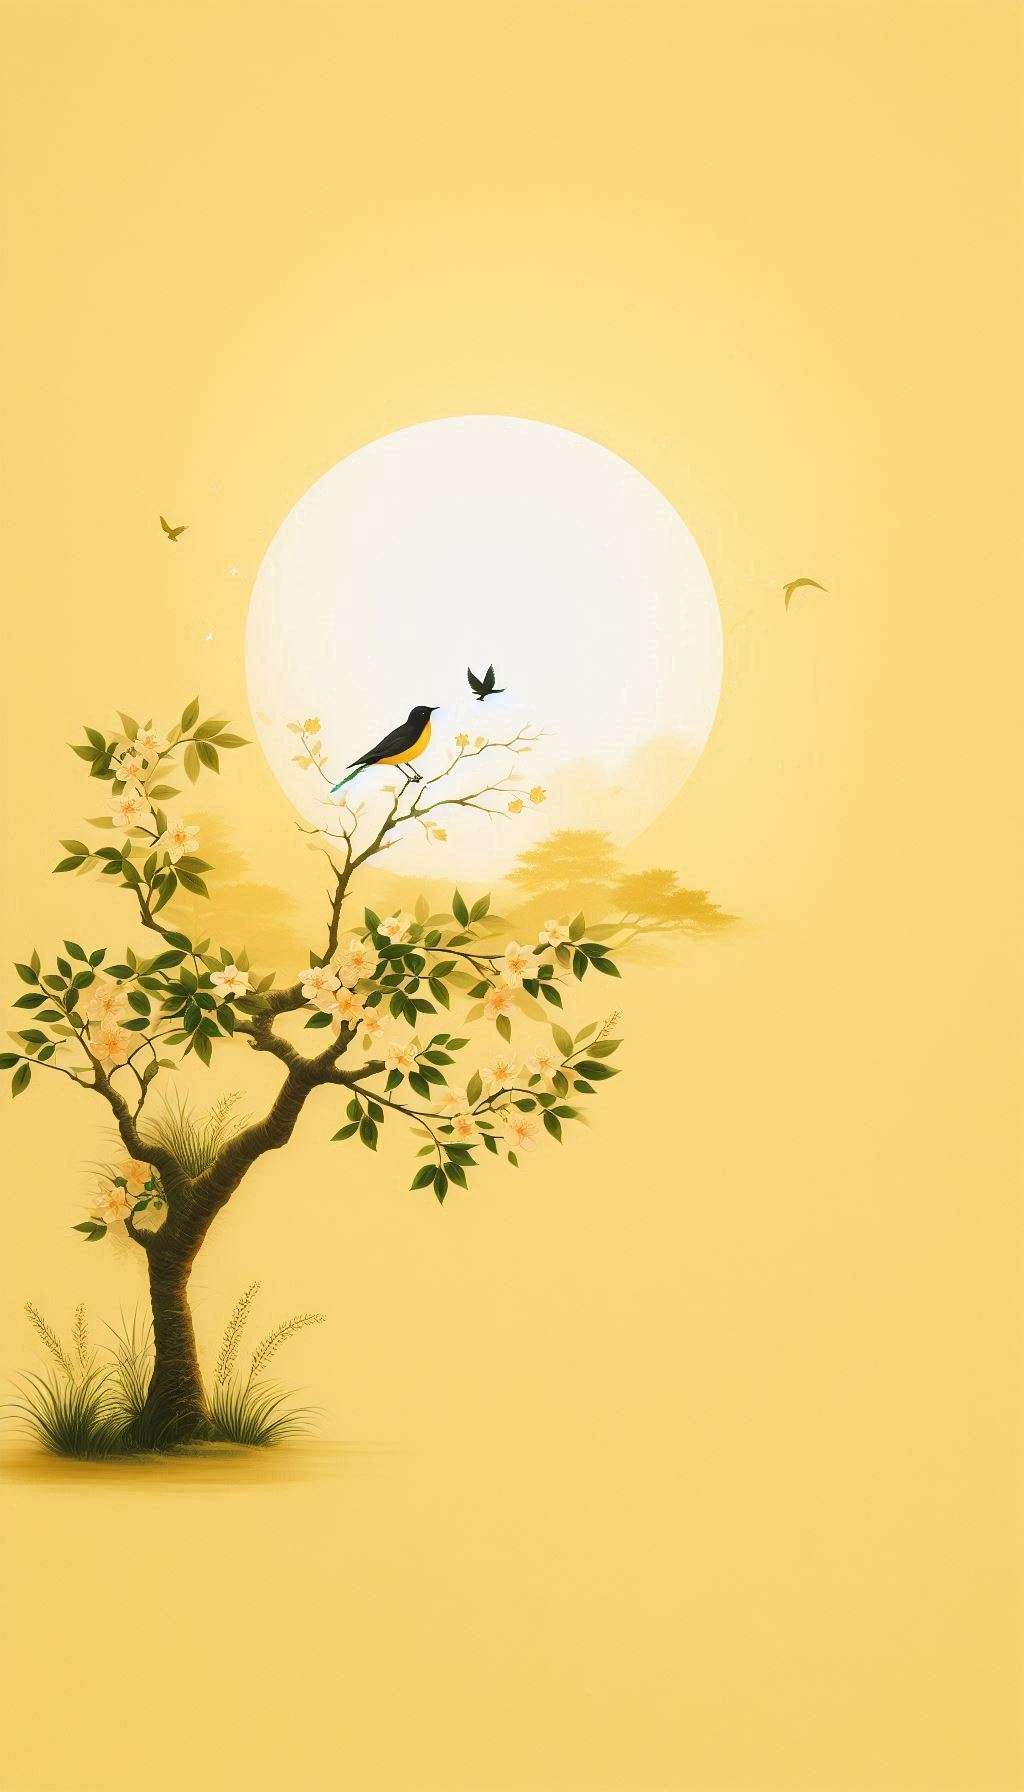 aesthetic light yellow background with tree sun and bird